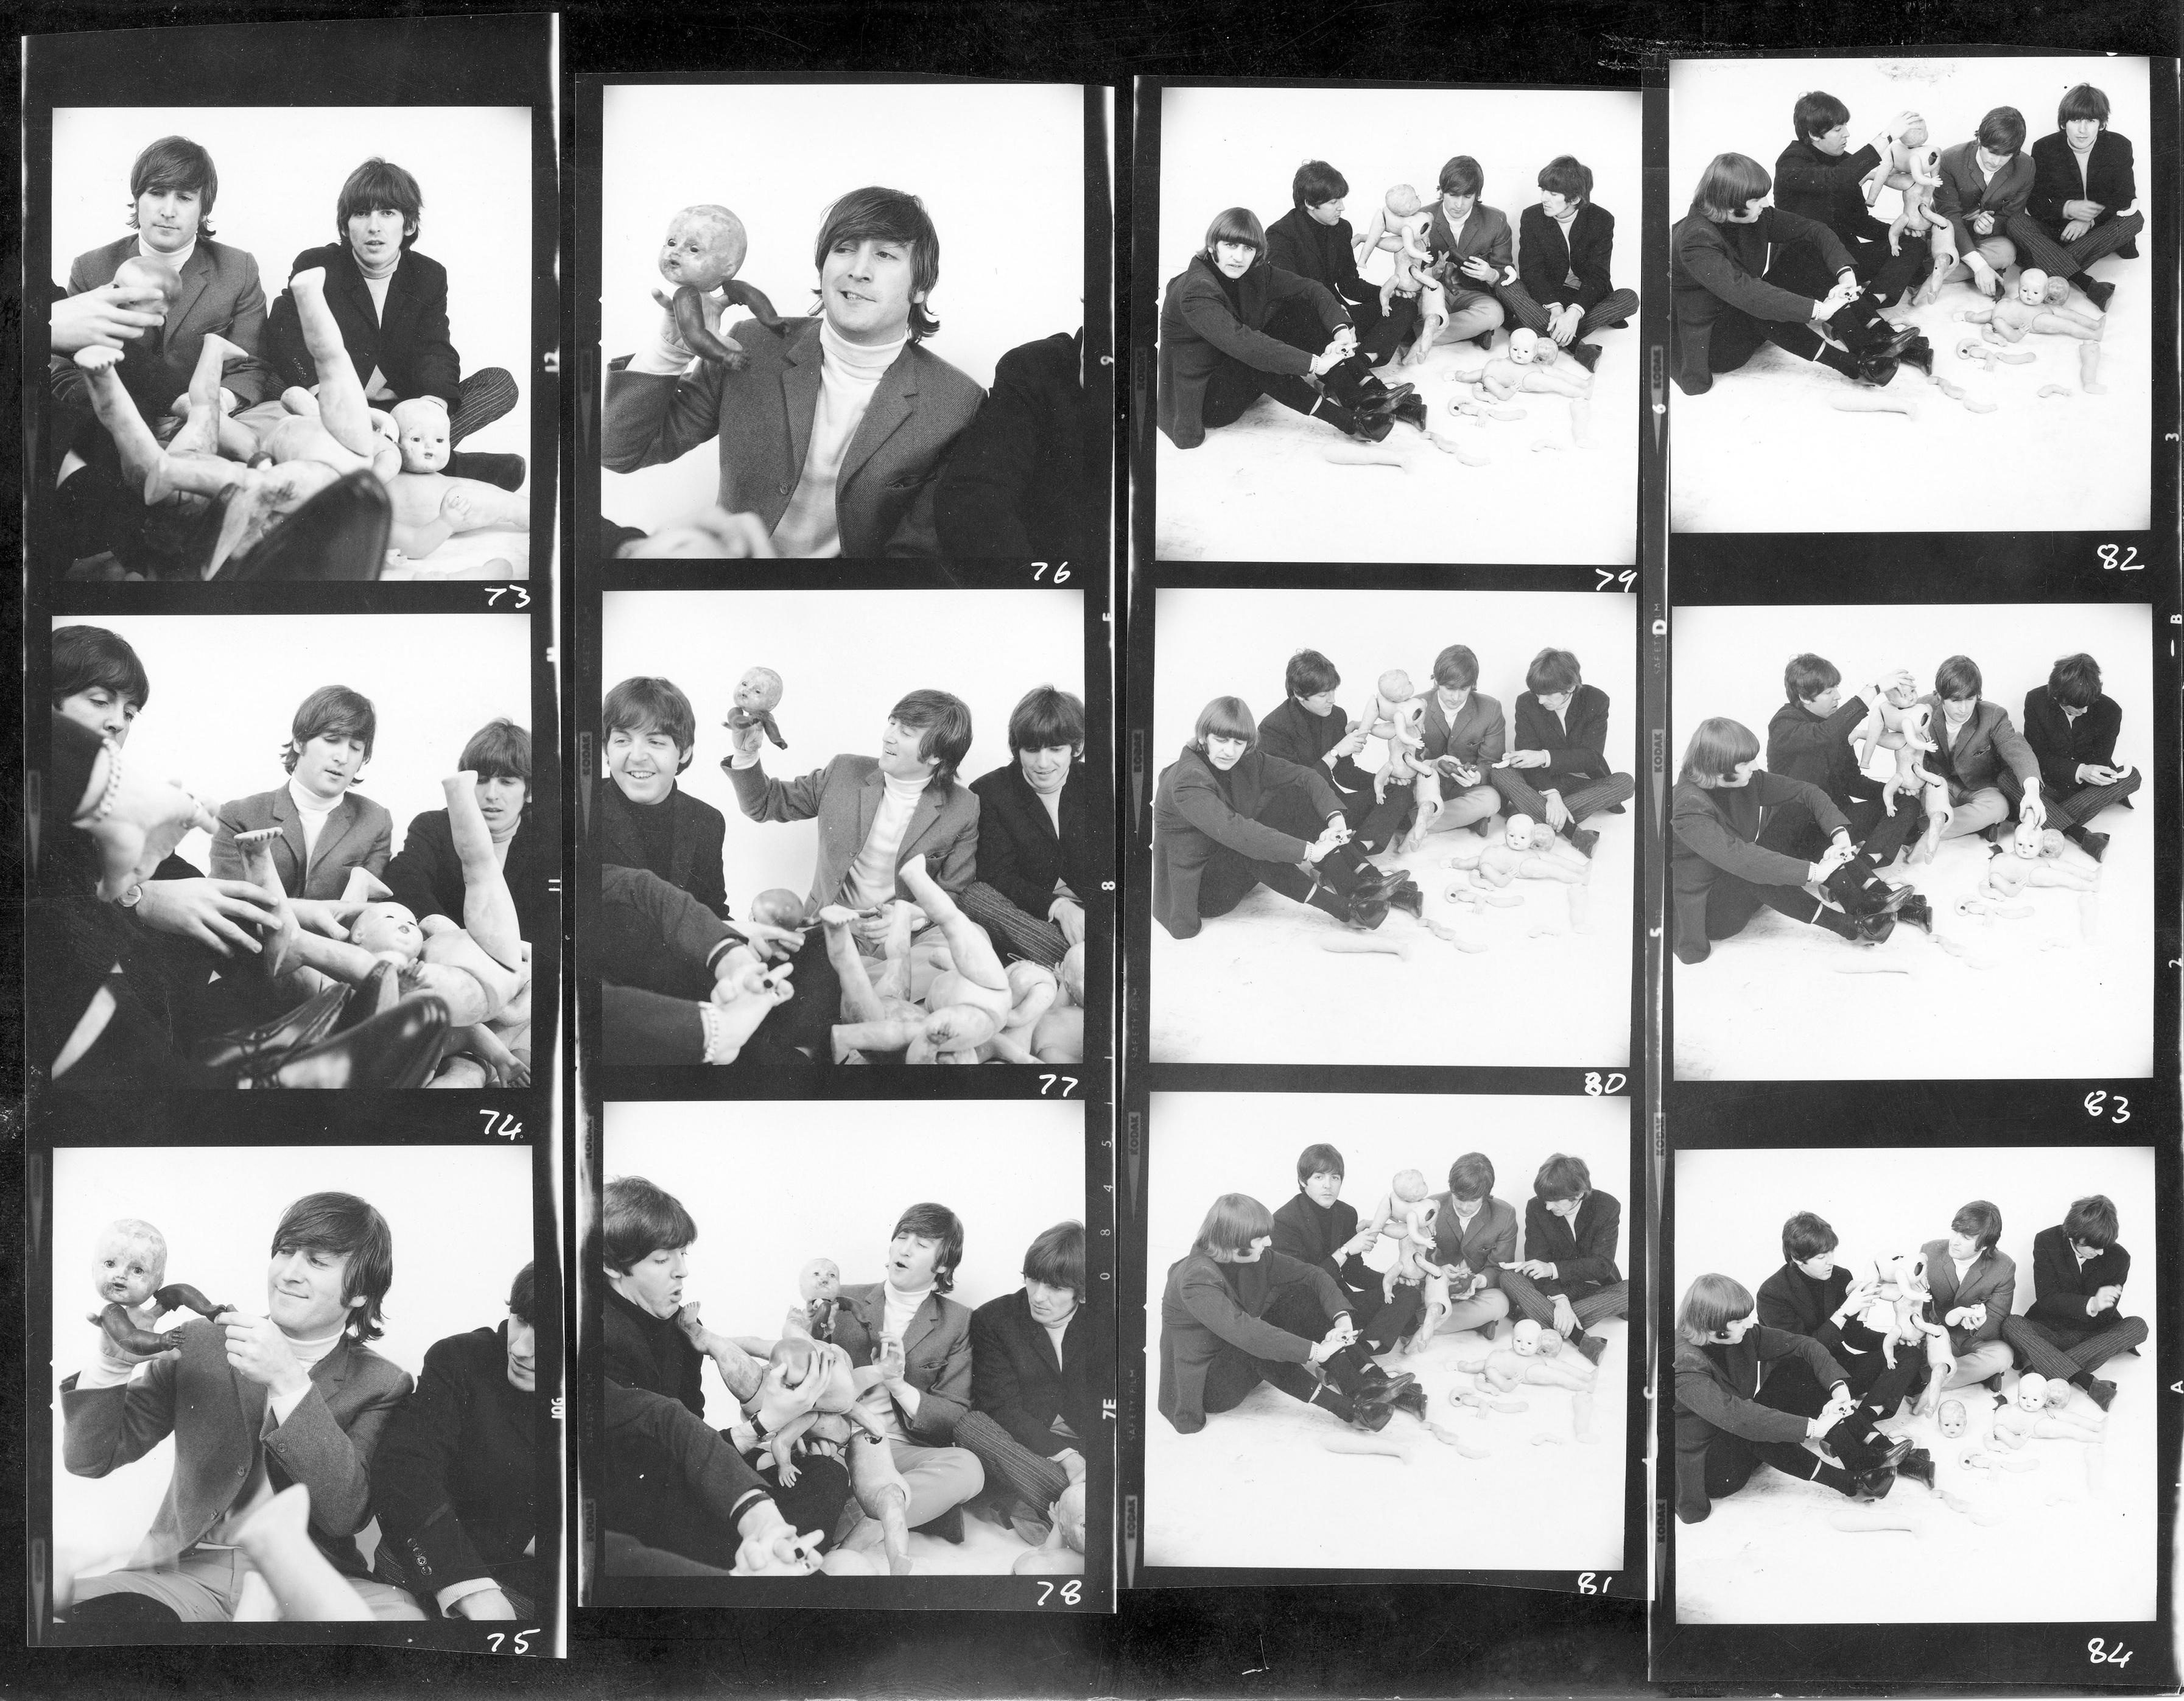 The Beatles "Dolls" contact sheet by Robert Whitaker from the photo session that ended up giving the band the controversial cover for the 1966 release "Yesterday and Today". 

On March 25, 1966, The Beatles visited 1 The Vale, Chelsea, London, a